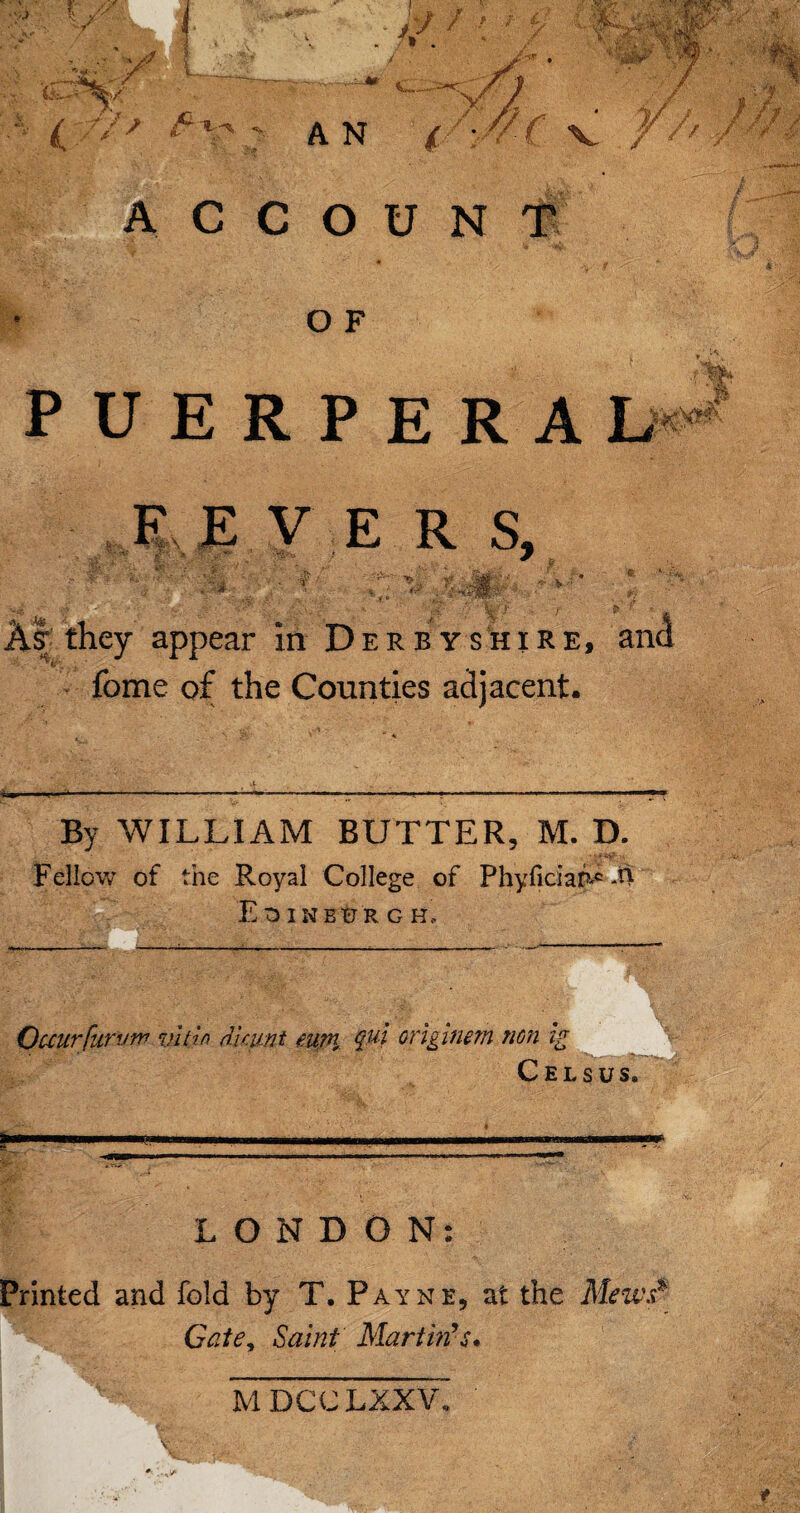 ACCOUNT O F ( » PUERPERA L^ F.EVERS, A ' V \ * ) '' 4. As; they appear in Derbyshire, and *: feme of the Counties adjacent. By WILLIAM BUTTER, M. D. Fellow of the Royal College of Phyficiafl** M Edinburgh, Occur fur vn7 vlt'm dktint eup\ ? qui orlginem non ig Cels us. LONDON: Printed and fold by T. Payne, at the Mem.? Gate, Saint Martin's•